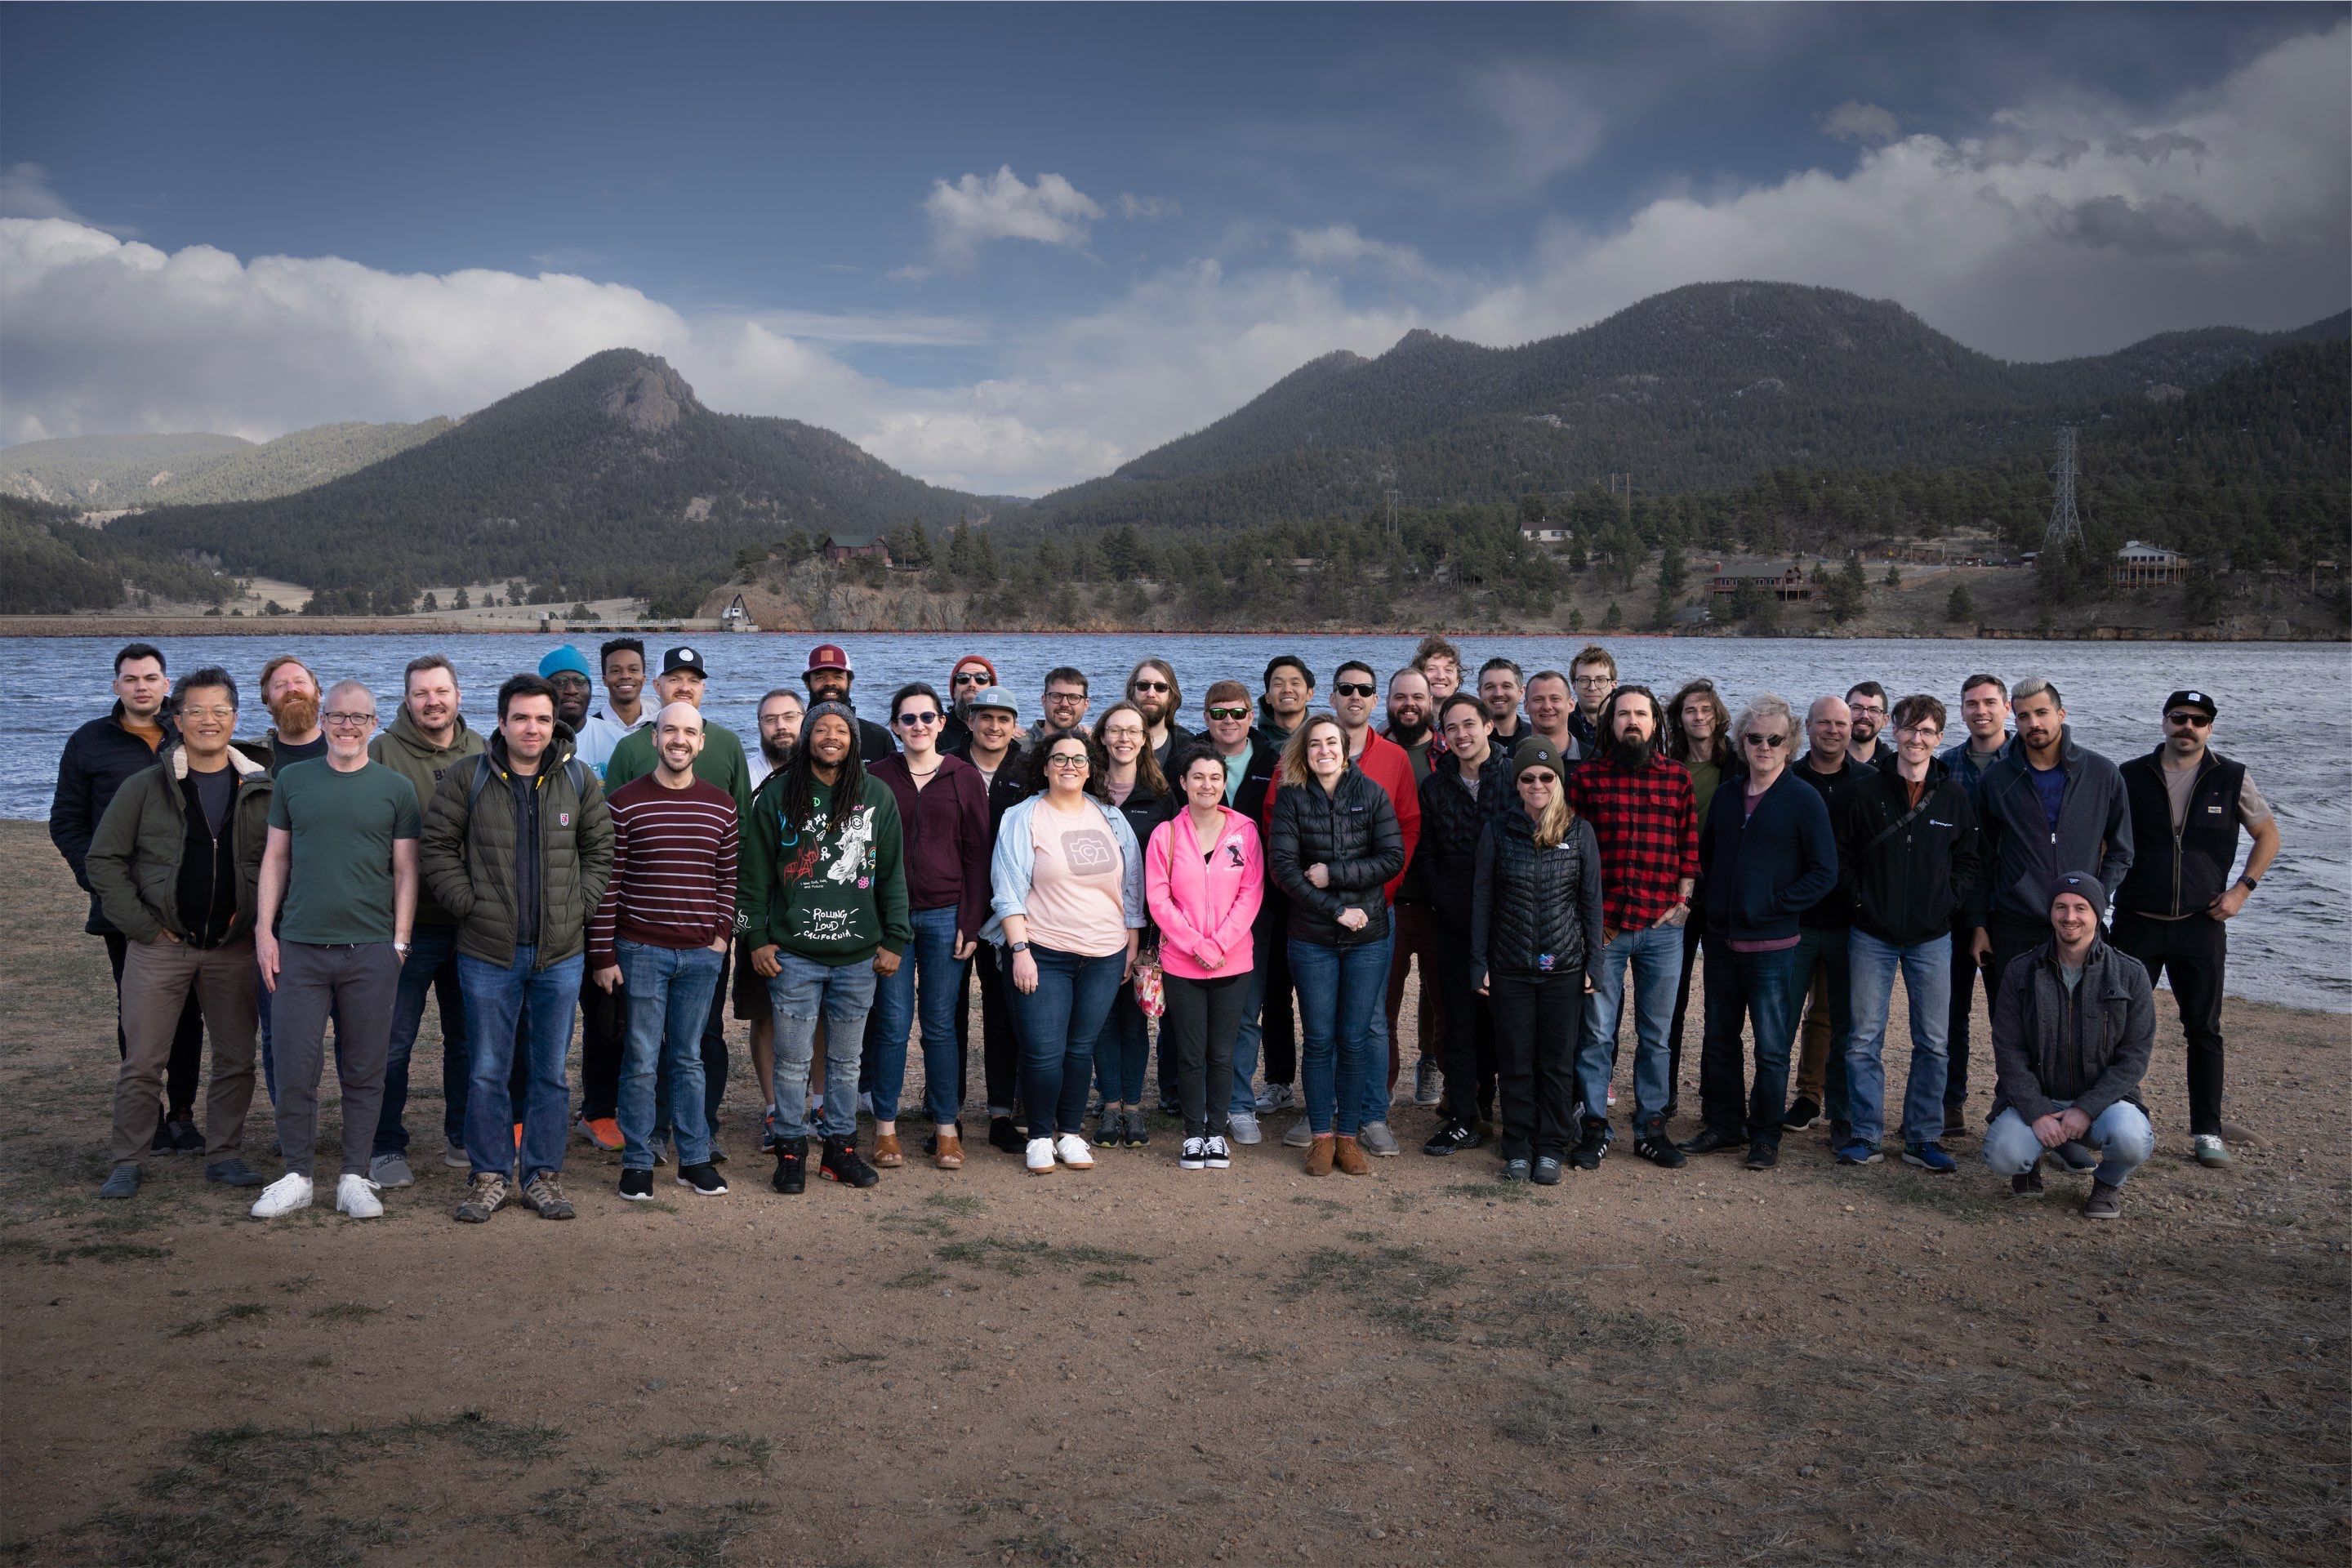 Large group photo of CompanyCam team with lake and mountains in background.